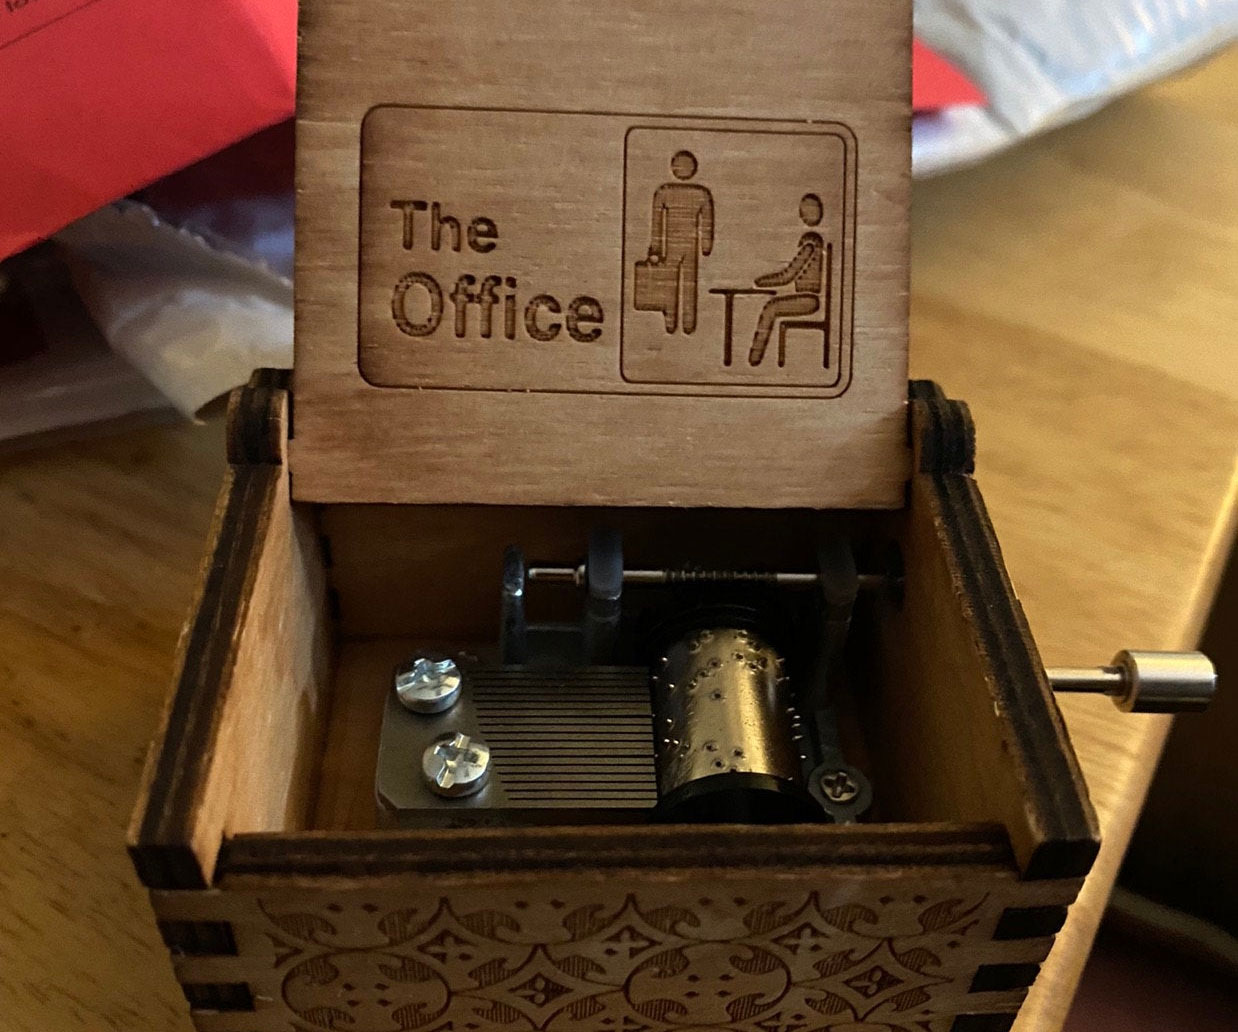 The Office Theme Song Music Box 1